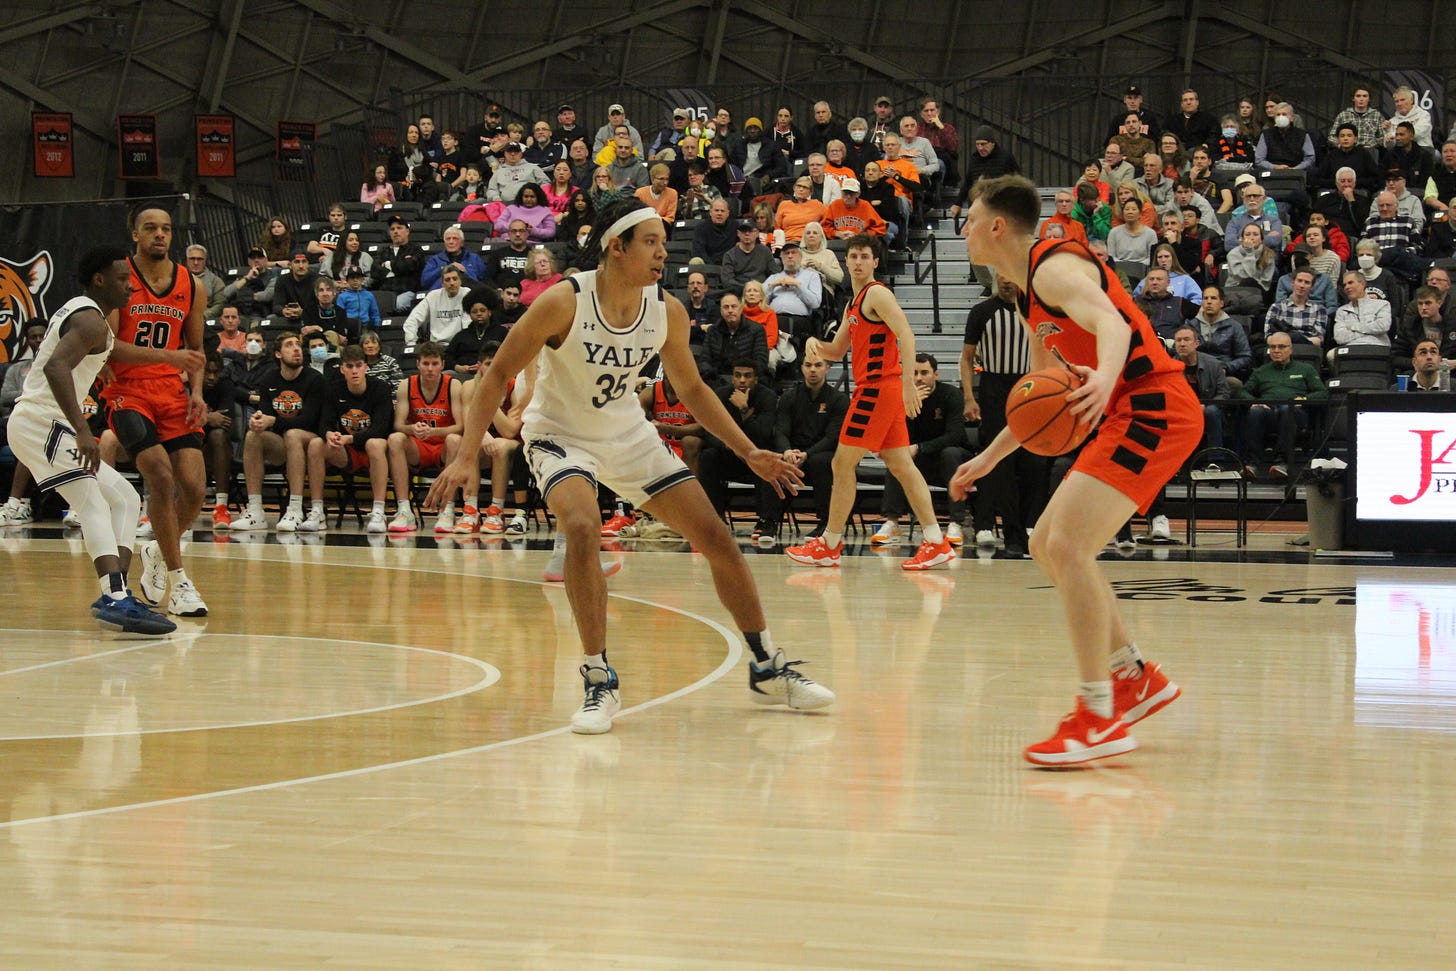 Isaiah Kelly of Yale (#35) guards Matt Allocco of Princeton during a game on Feb. 18, 2023. (Photo by Adam Zielonka)